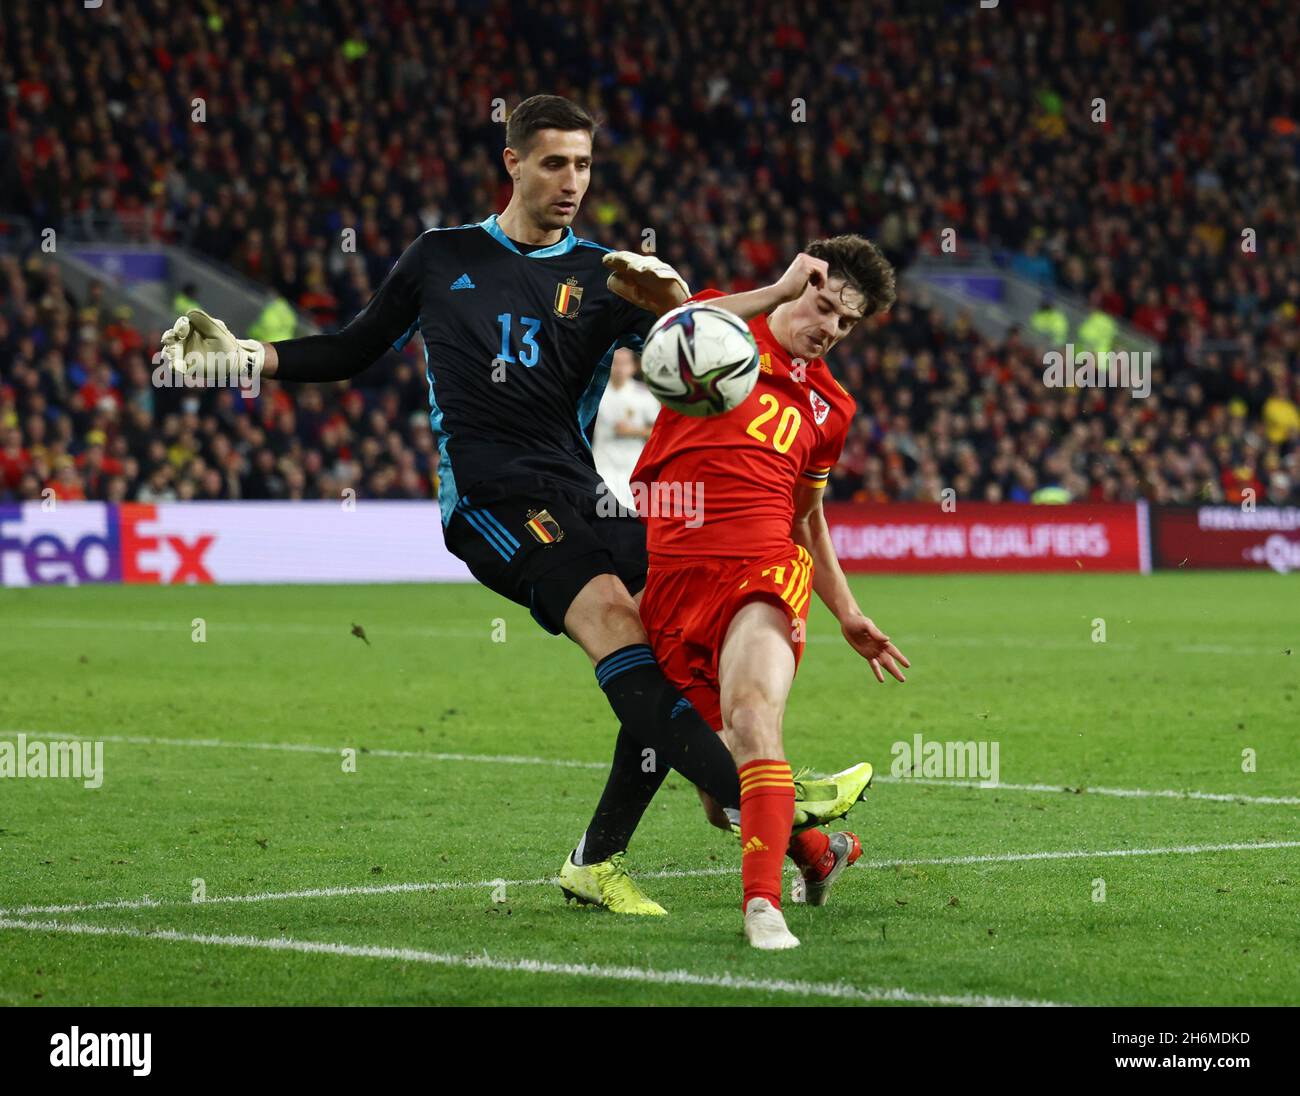 Cardiff, Wales, 16th November 2021. Koen Casteels of Belgium closed down by Daniel James of Wales  during the FIFA World Cup 2022 European Qualifying match at the Cardiff City Stadium, Cardiff. Picture credit should read: Darren Staples / Sportimage Stock Photo